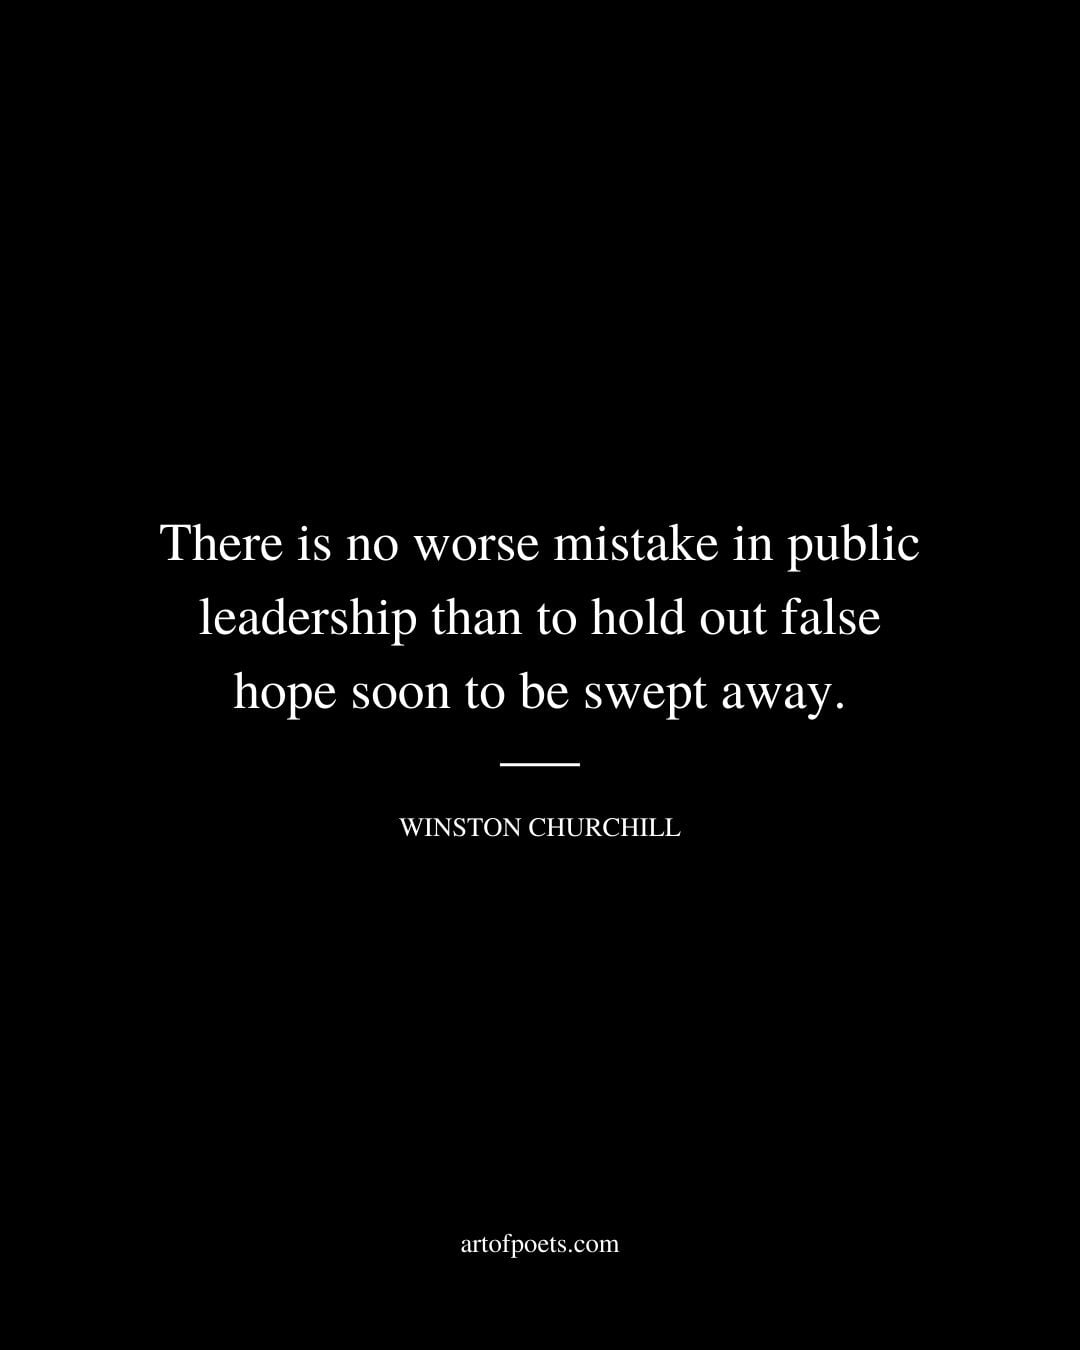 There is no worse mistake in public leadership than to hold out false hope soon to be swept away